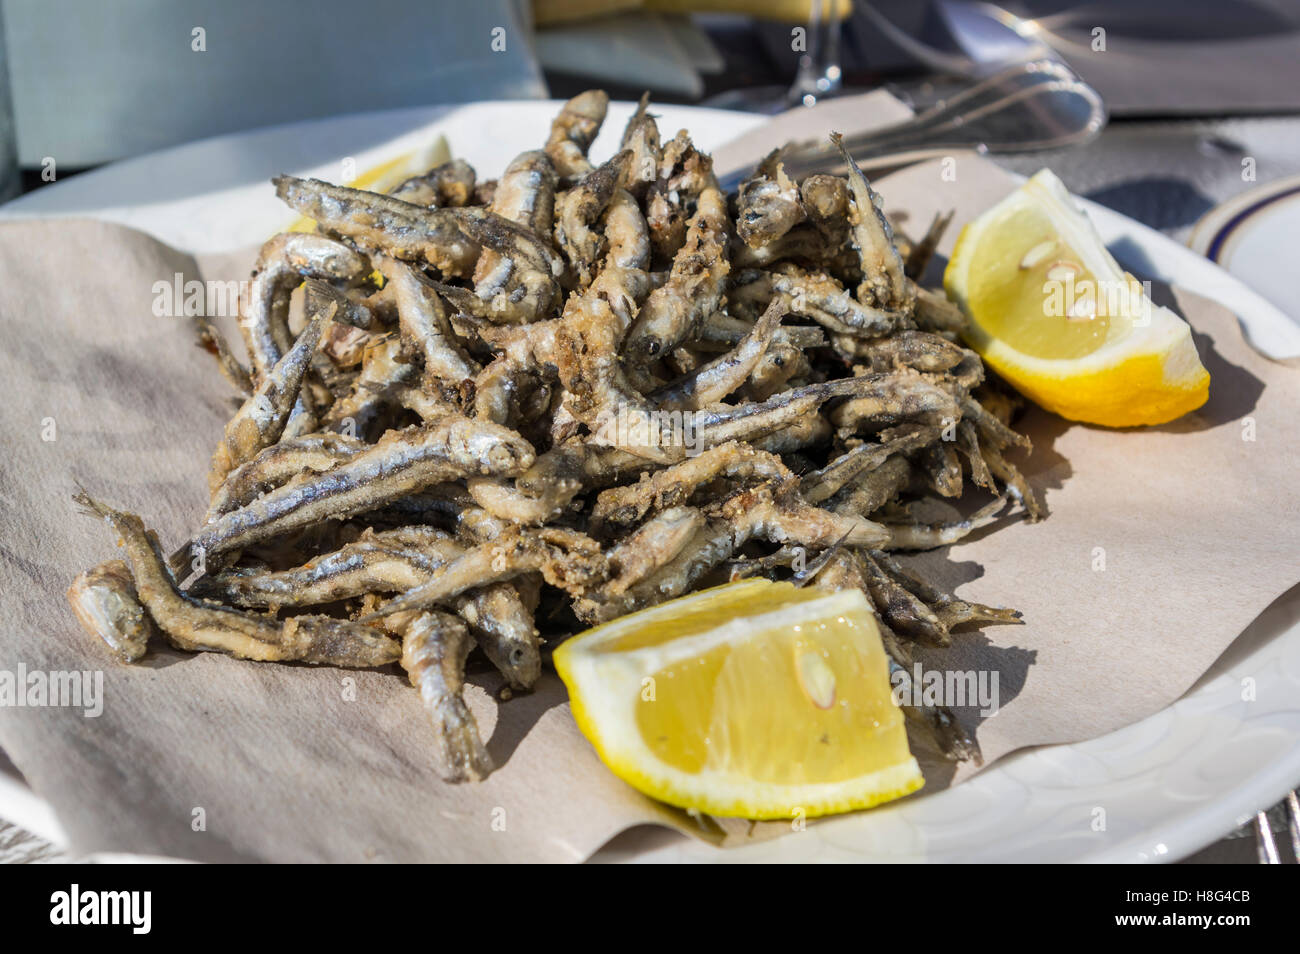 Plate of small European anchovies (engraulis encrasicolus), deep-fried as whole fishes and served with lemon. Typical dish of Liguria, Italy. Stock Photo